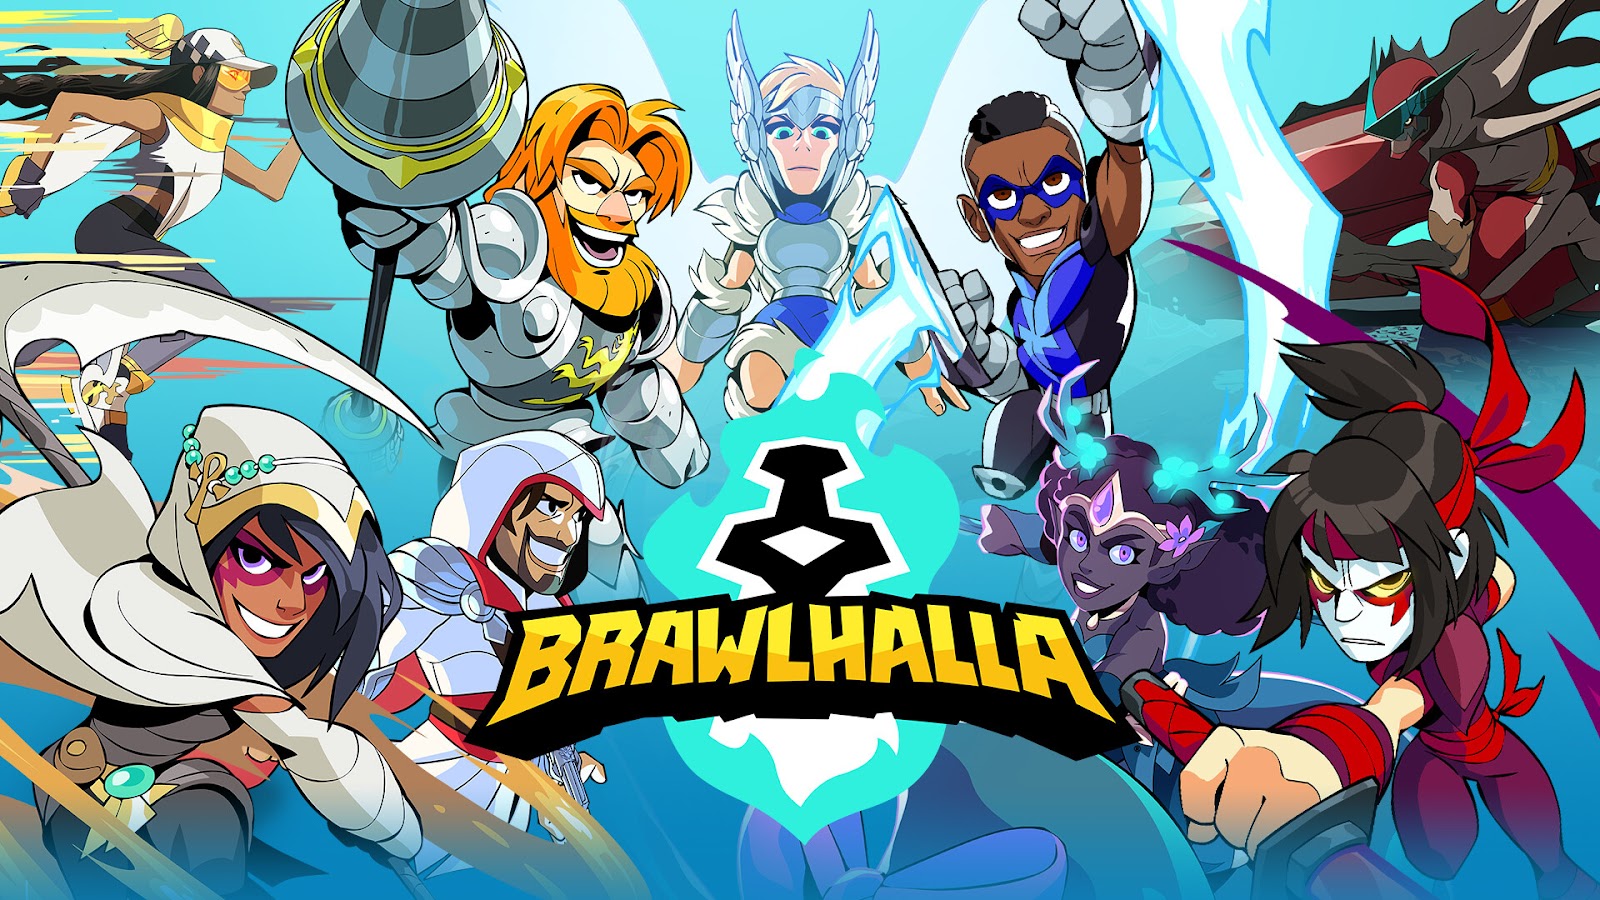 Key Features of Brawlhalla